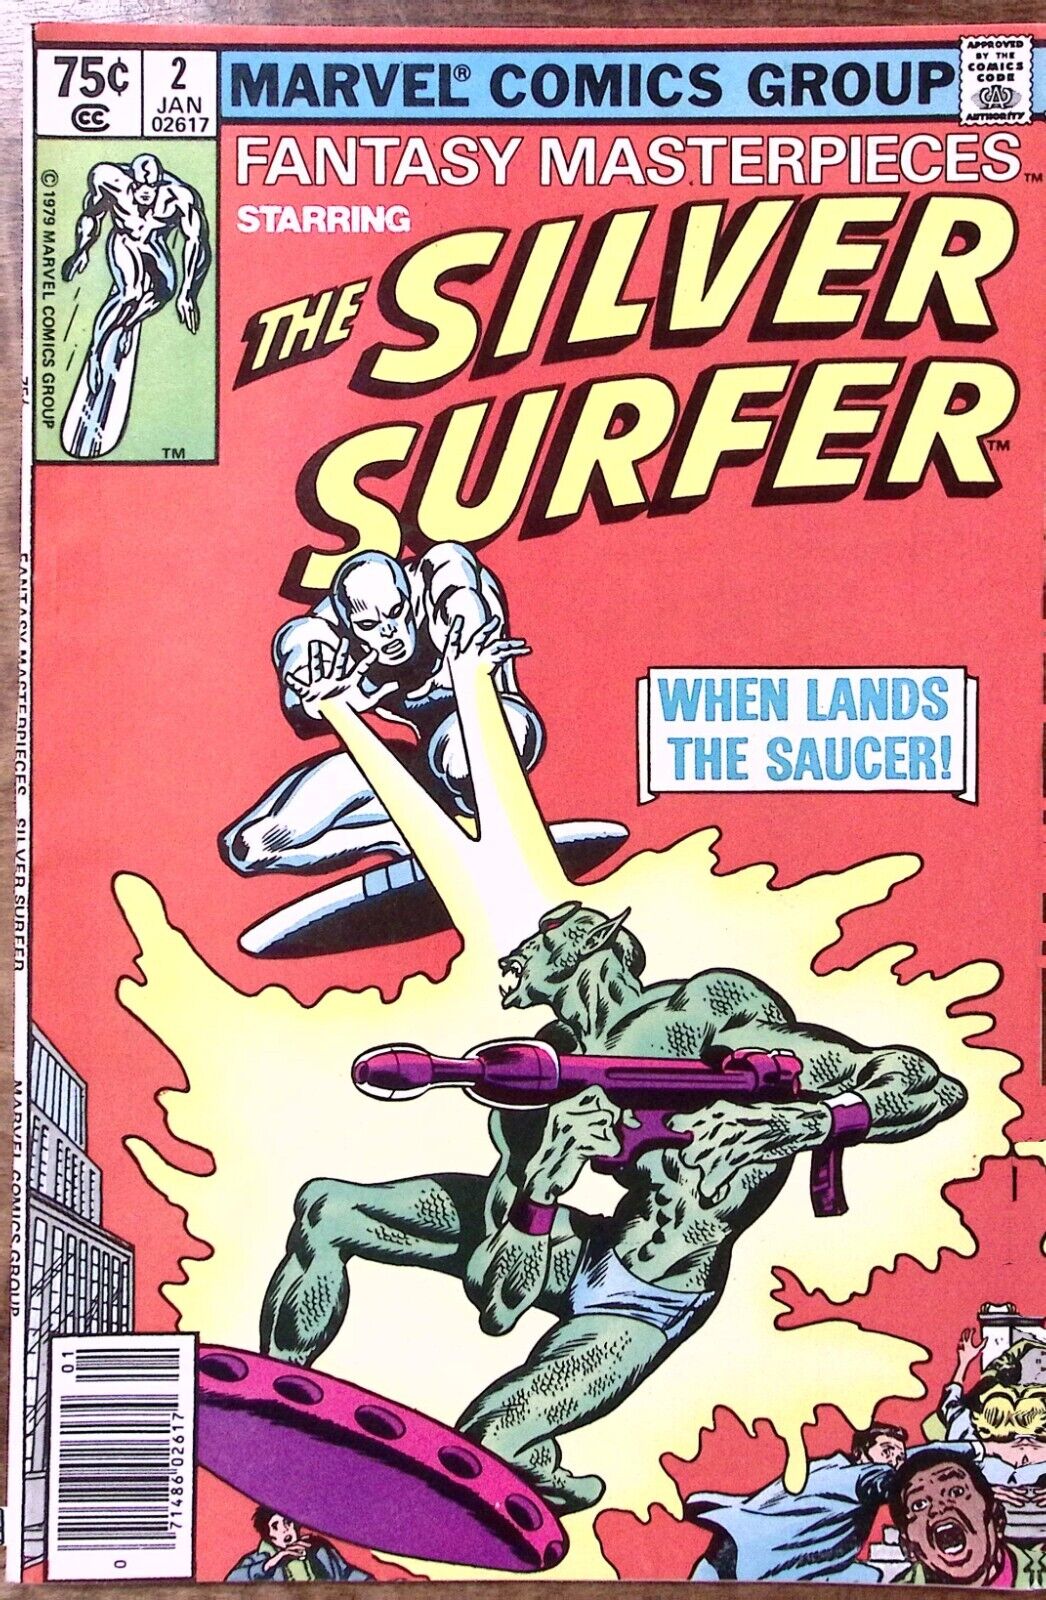 1980 FANTASY MASTERPIECES STARRING THE SILVER SURFER #2 JAN MARVEL COMICS Z3568